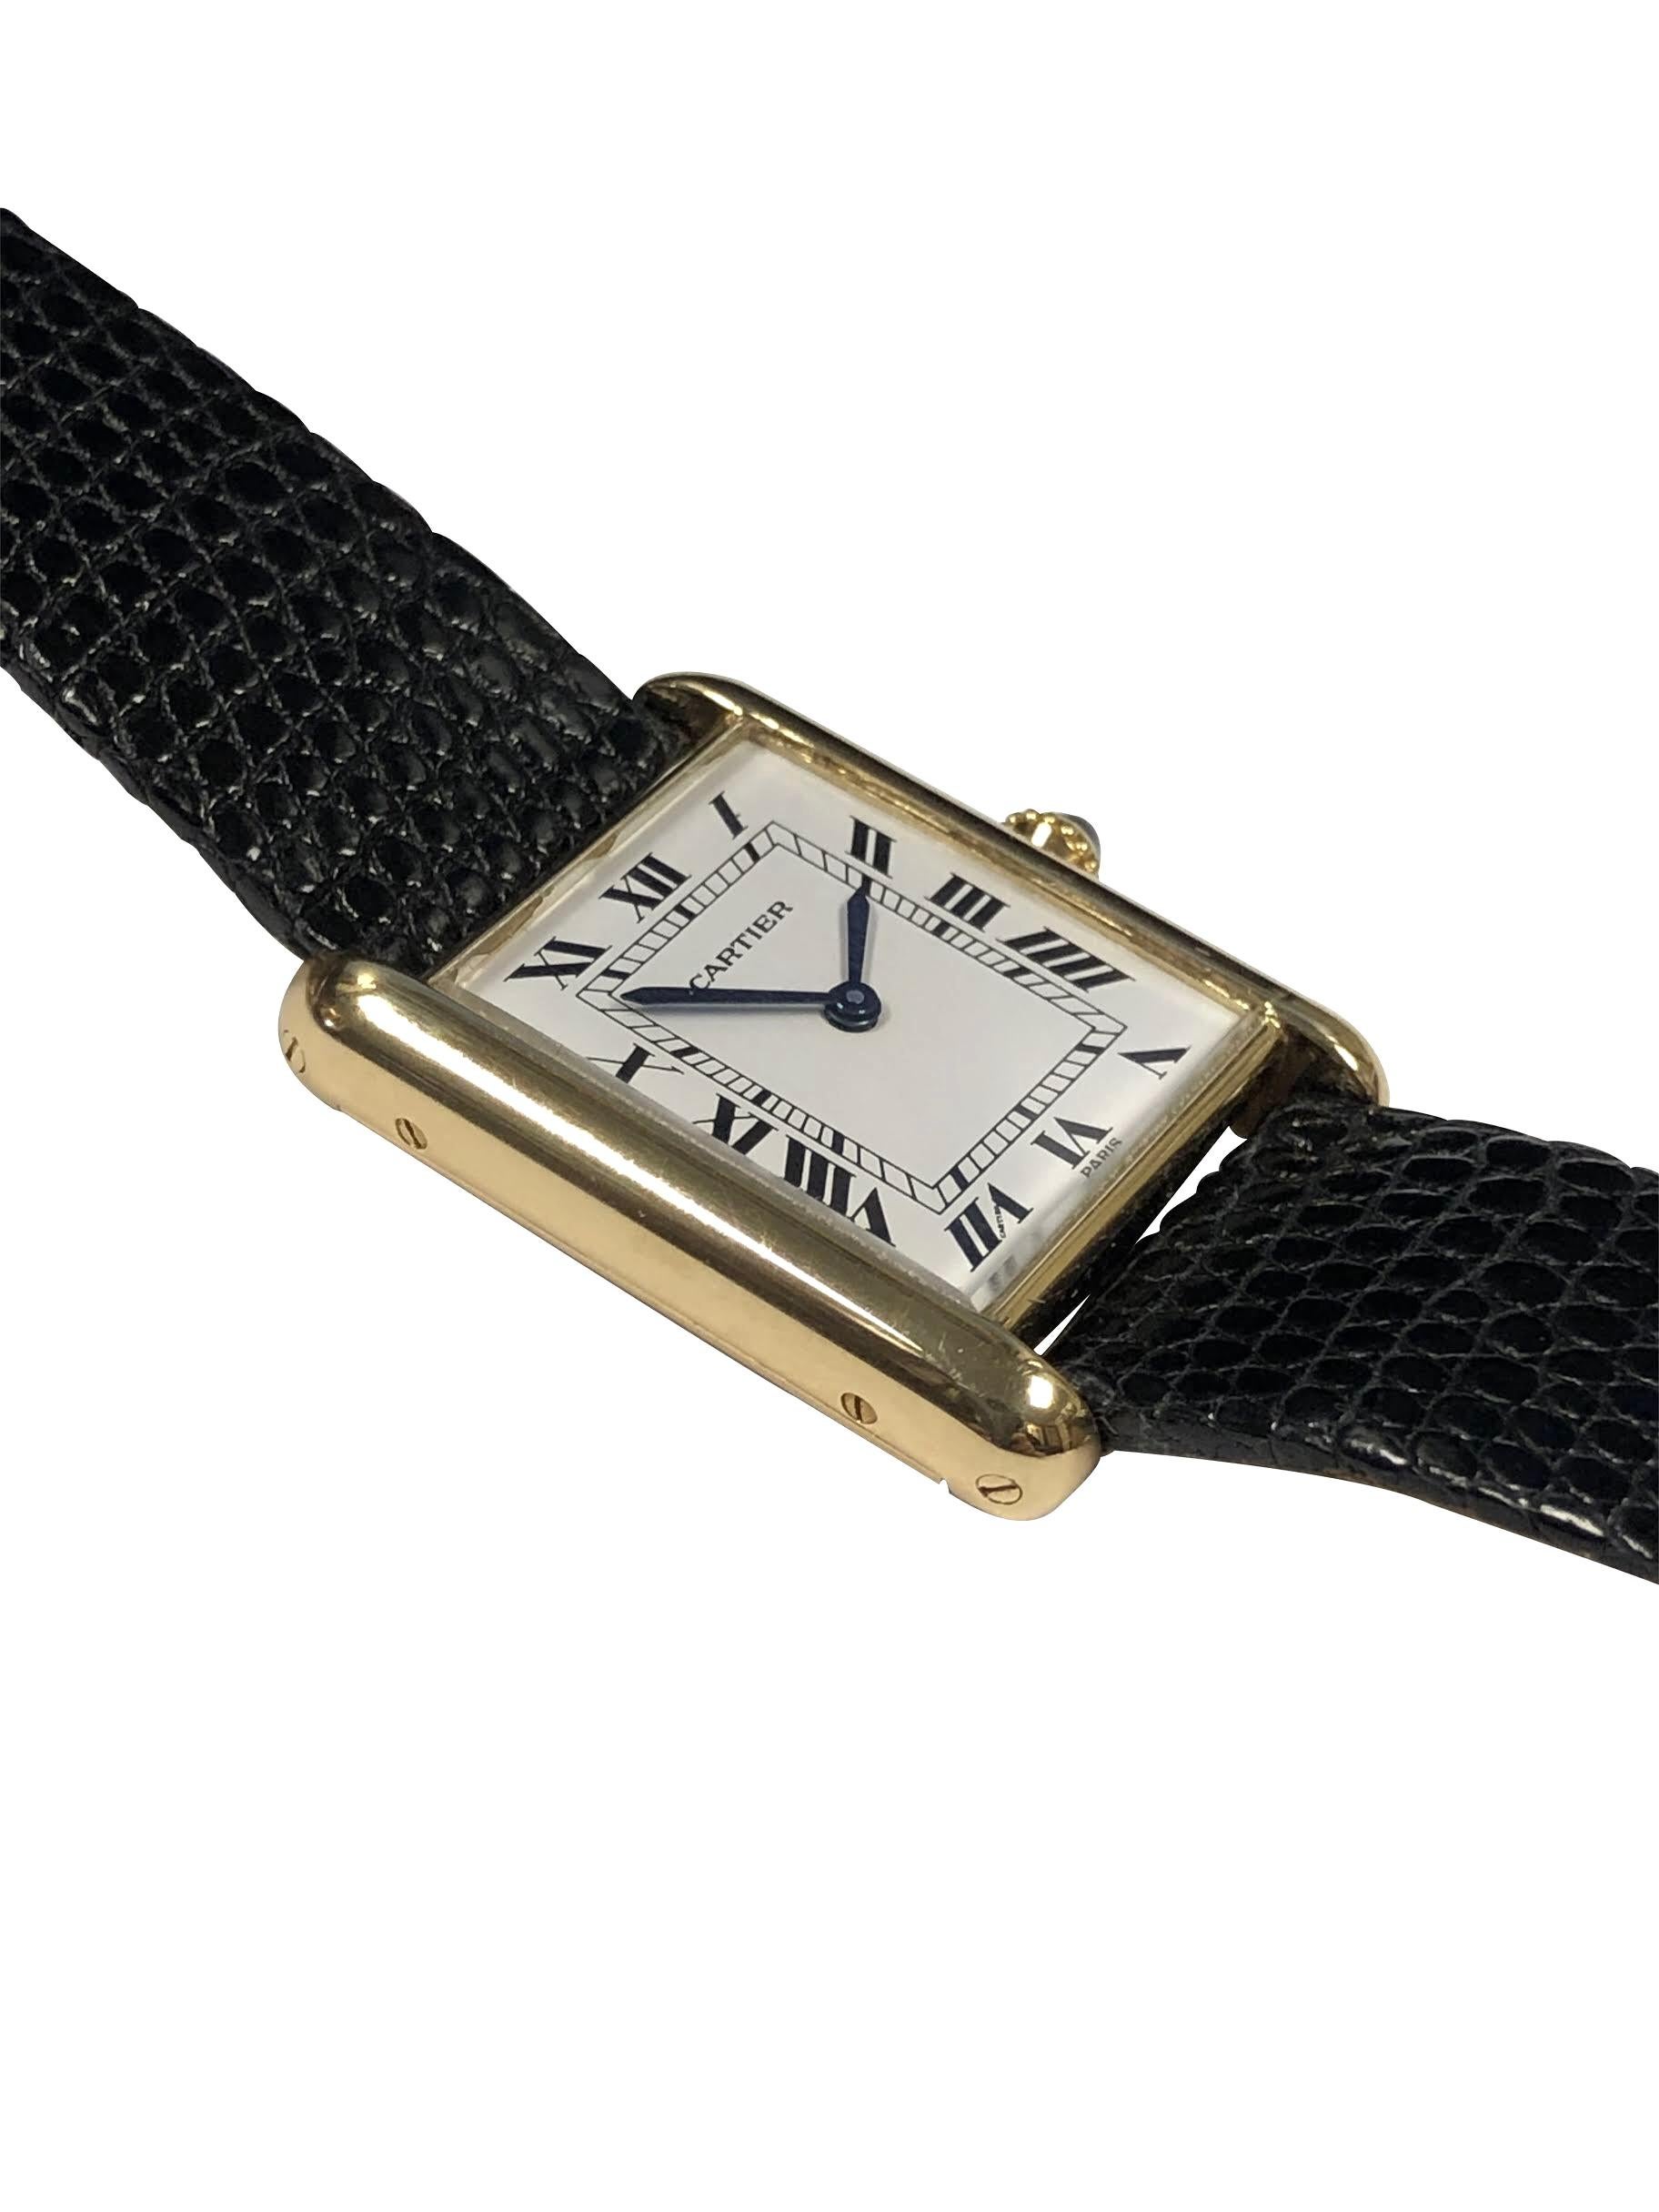 Circa 1985 - 1990 Cartier Classic Tank Wrist Watch, this being the more desirable and harder to find Model with Paris Case and Dial. 18 K Yellow Gold 30 X 24 M.M. 2 Piece case, 17 Jewel, mechanical, Manual wind Cartier movement, White Dial with